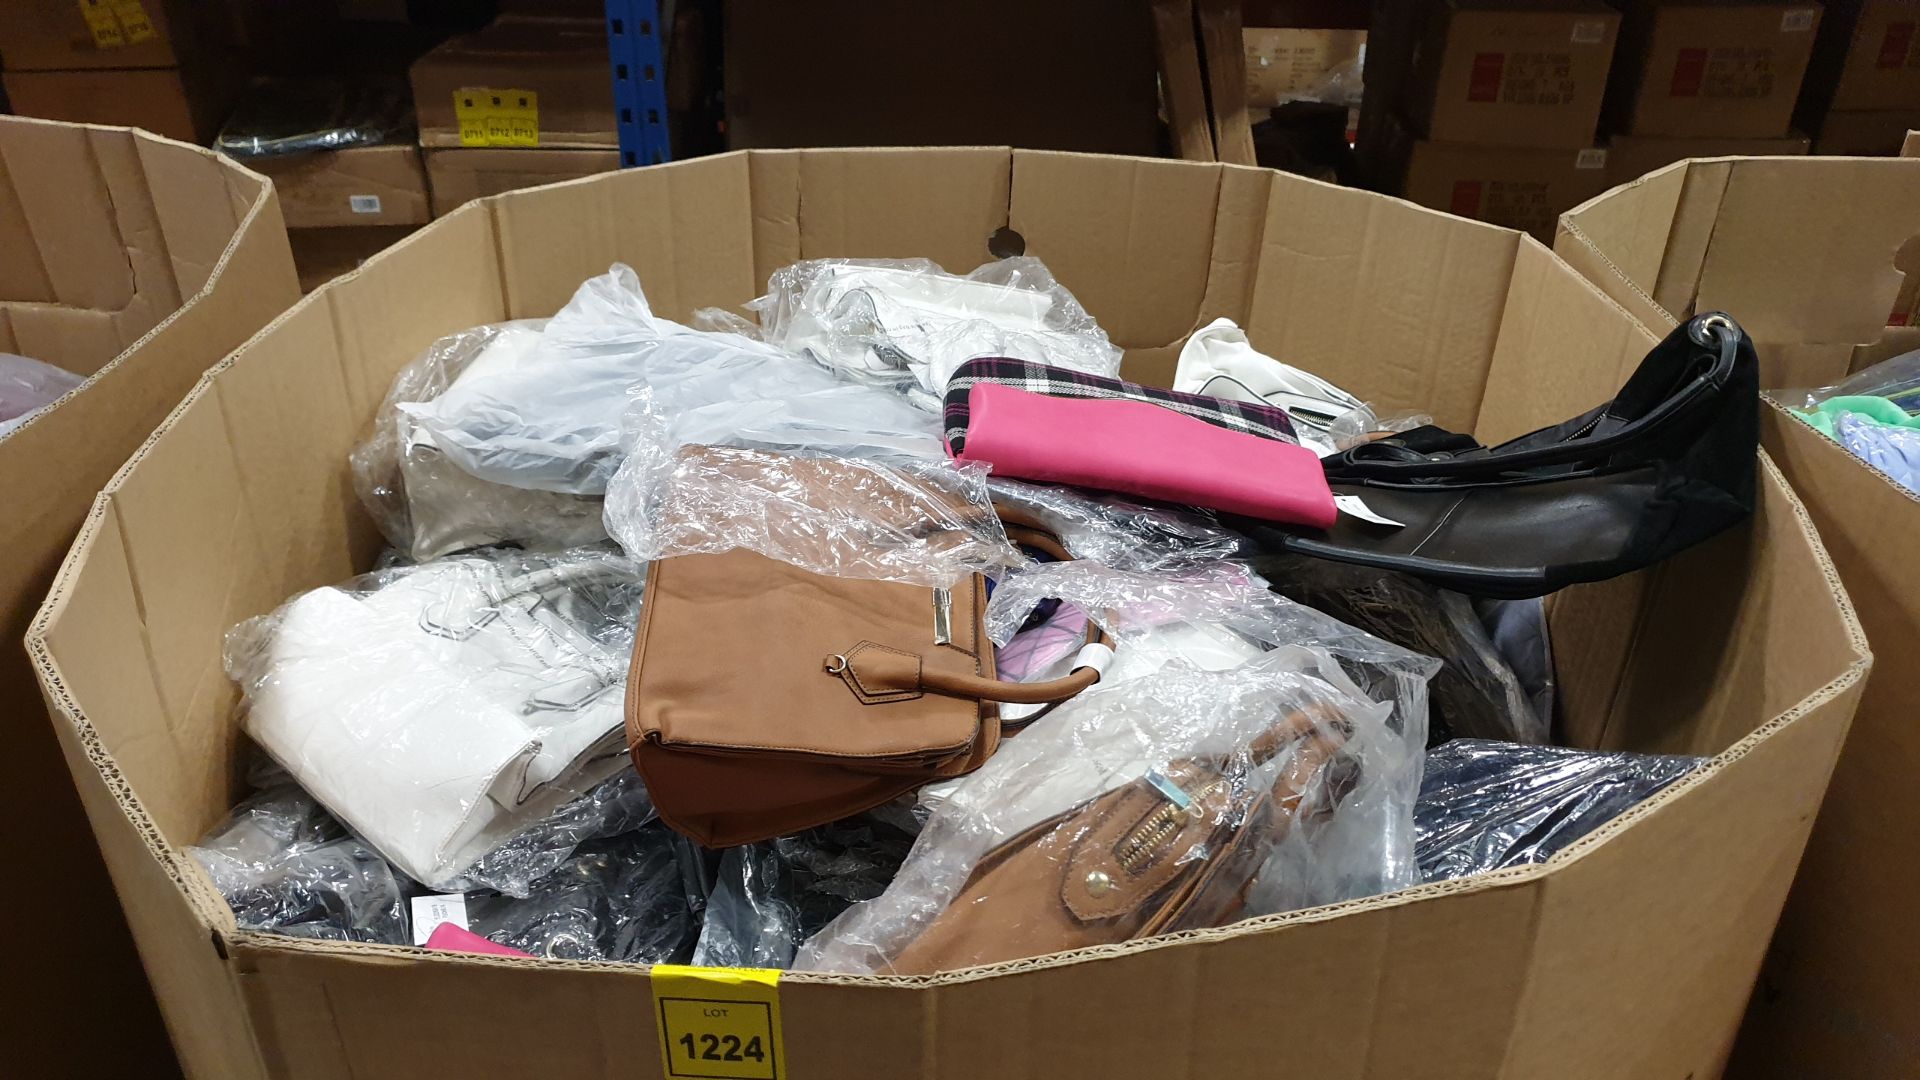 FULL PALLET OF BAGS IN VARIOUS STYLES AND SIZES IE CLUTCH BAGS, HAND BAGS, SHOULDER BAGS ETC